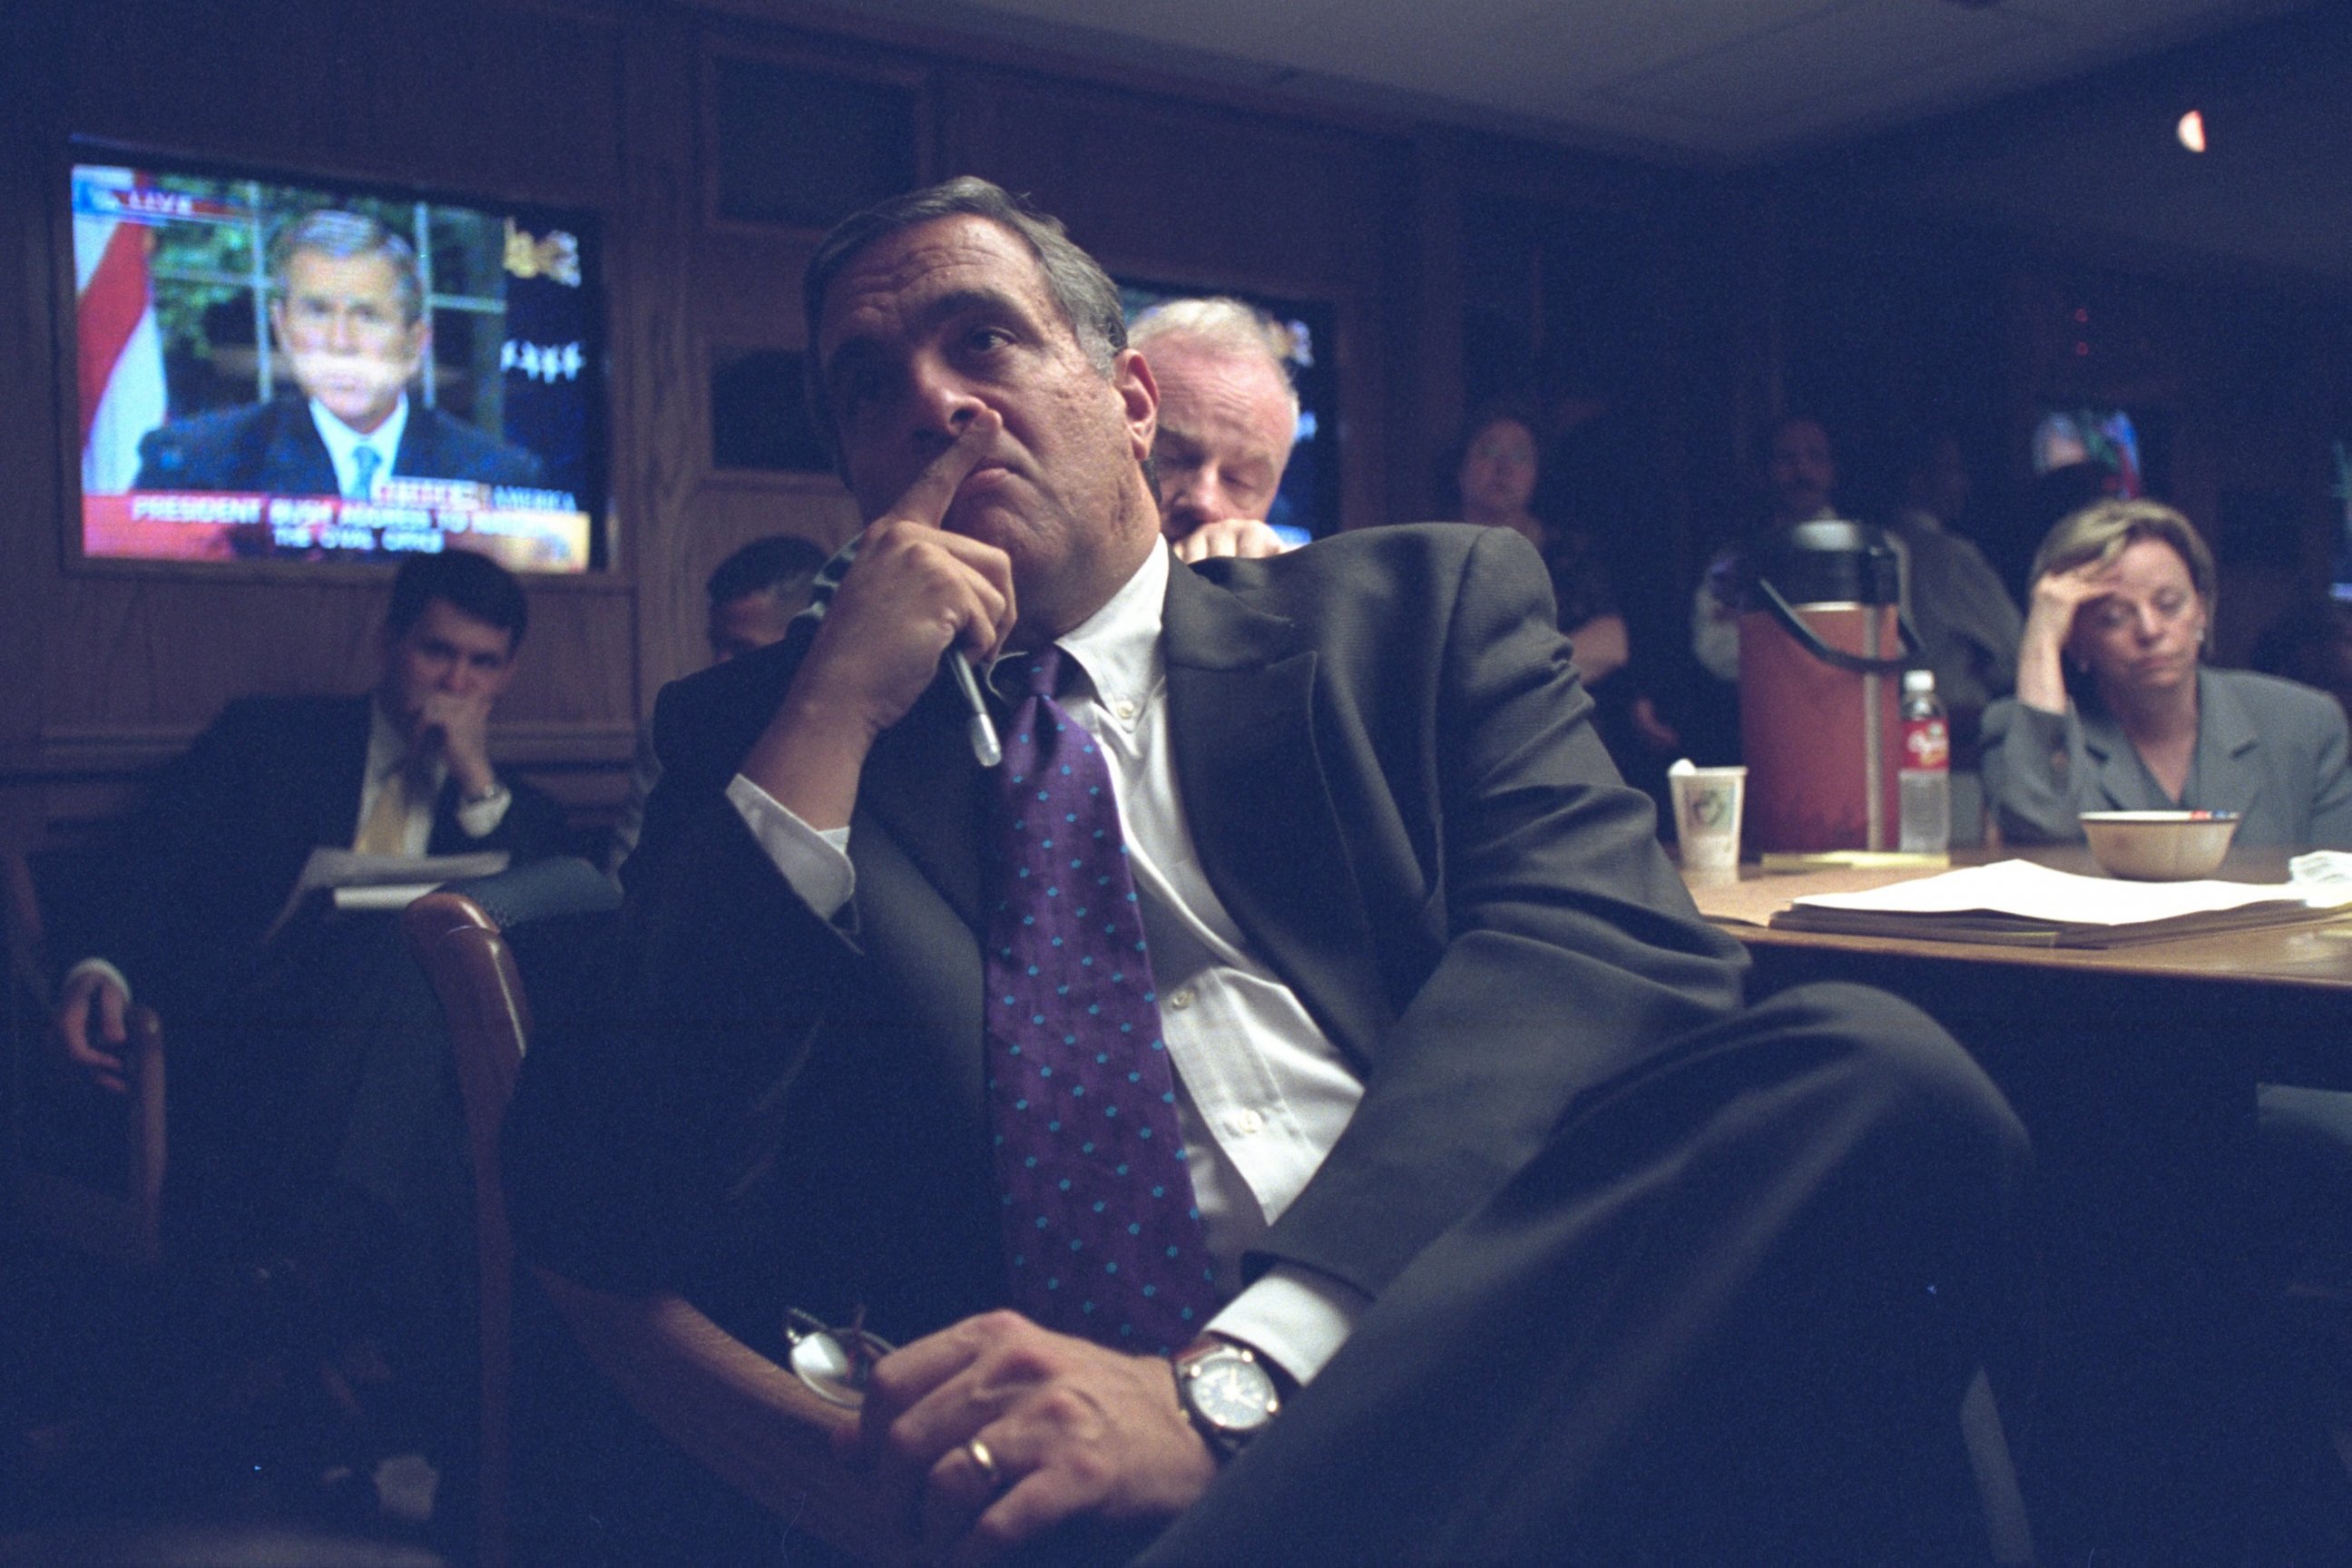 PHOTO: This photo released by the U.S. National Archives shows CIA Director George Tenet watching President Bush on TV on September 11, 2001.